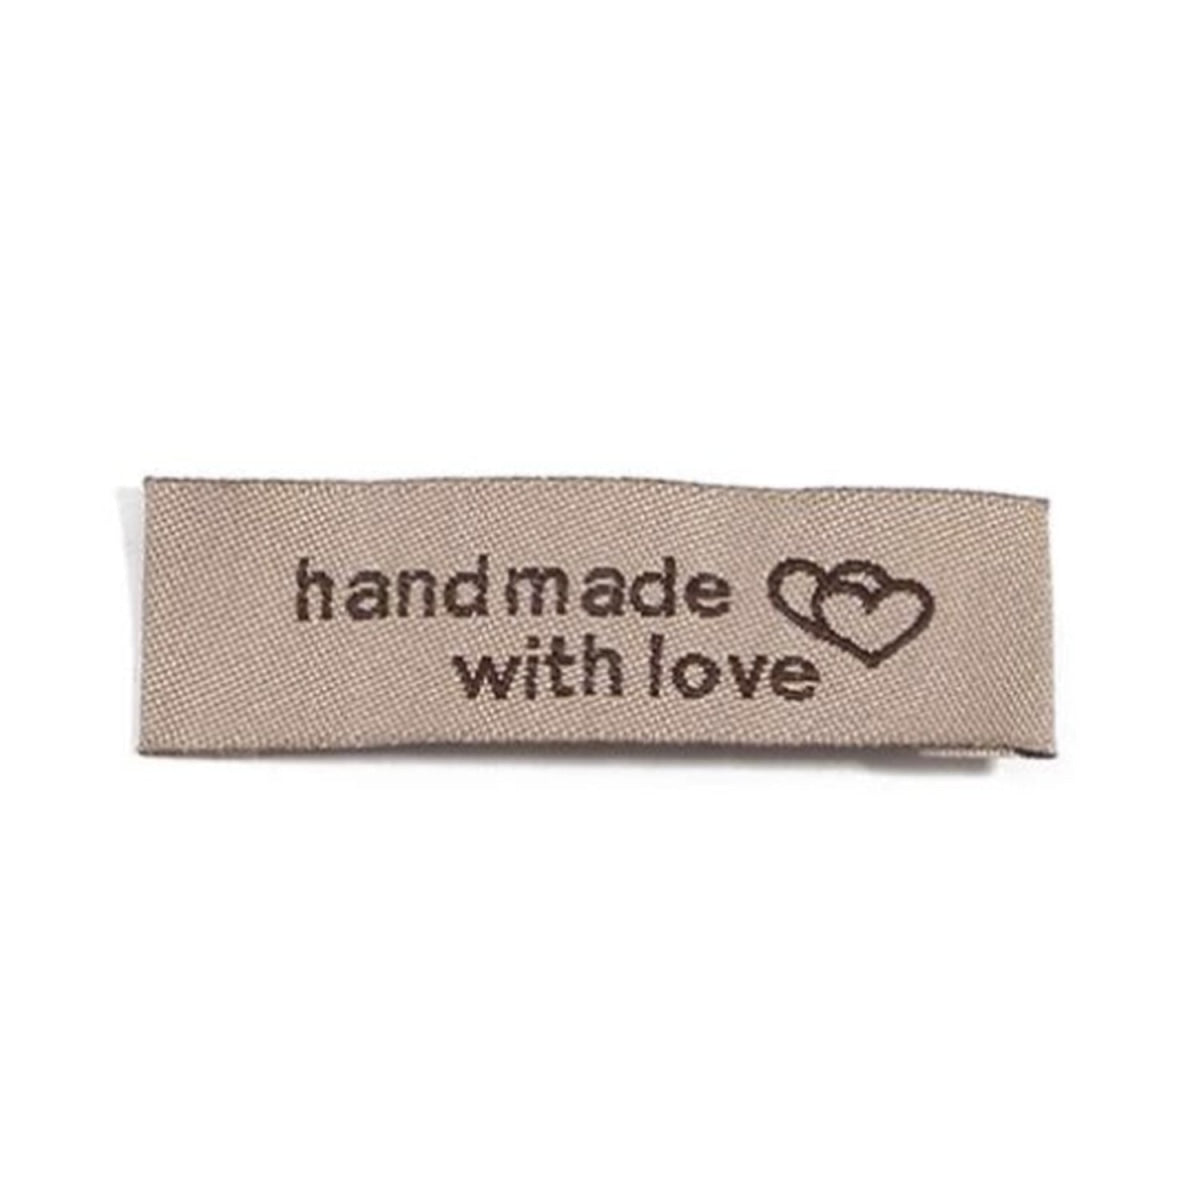 20pcs Sewing Tags Clothing Labels Cloth Fabric "Handmade with Love" Bags DIY - Brown - - Asia Sell